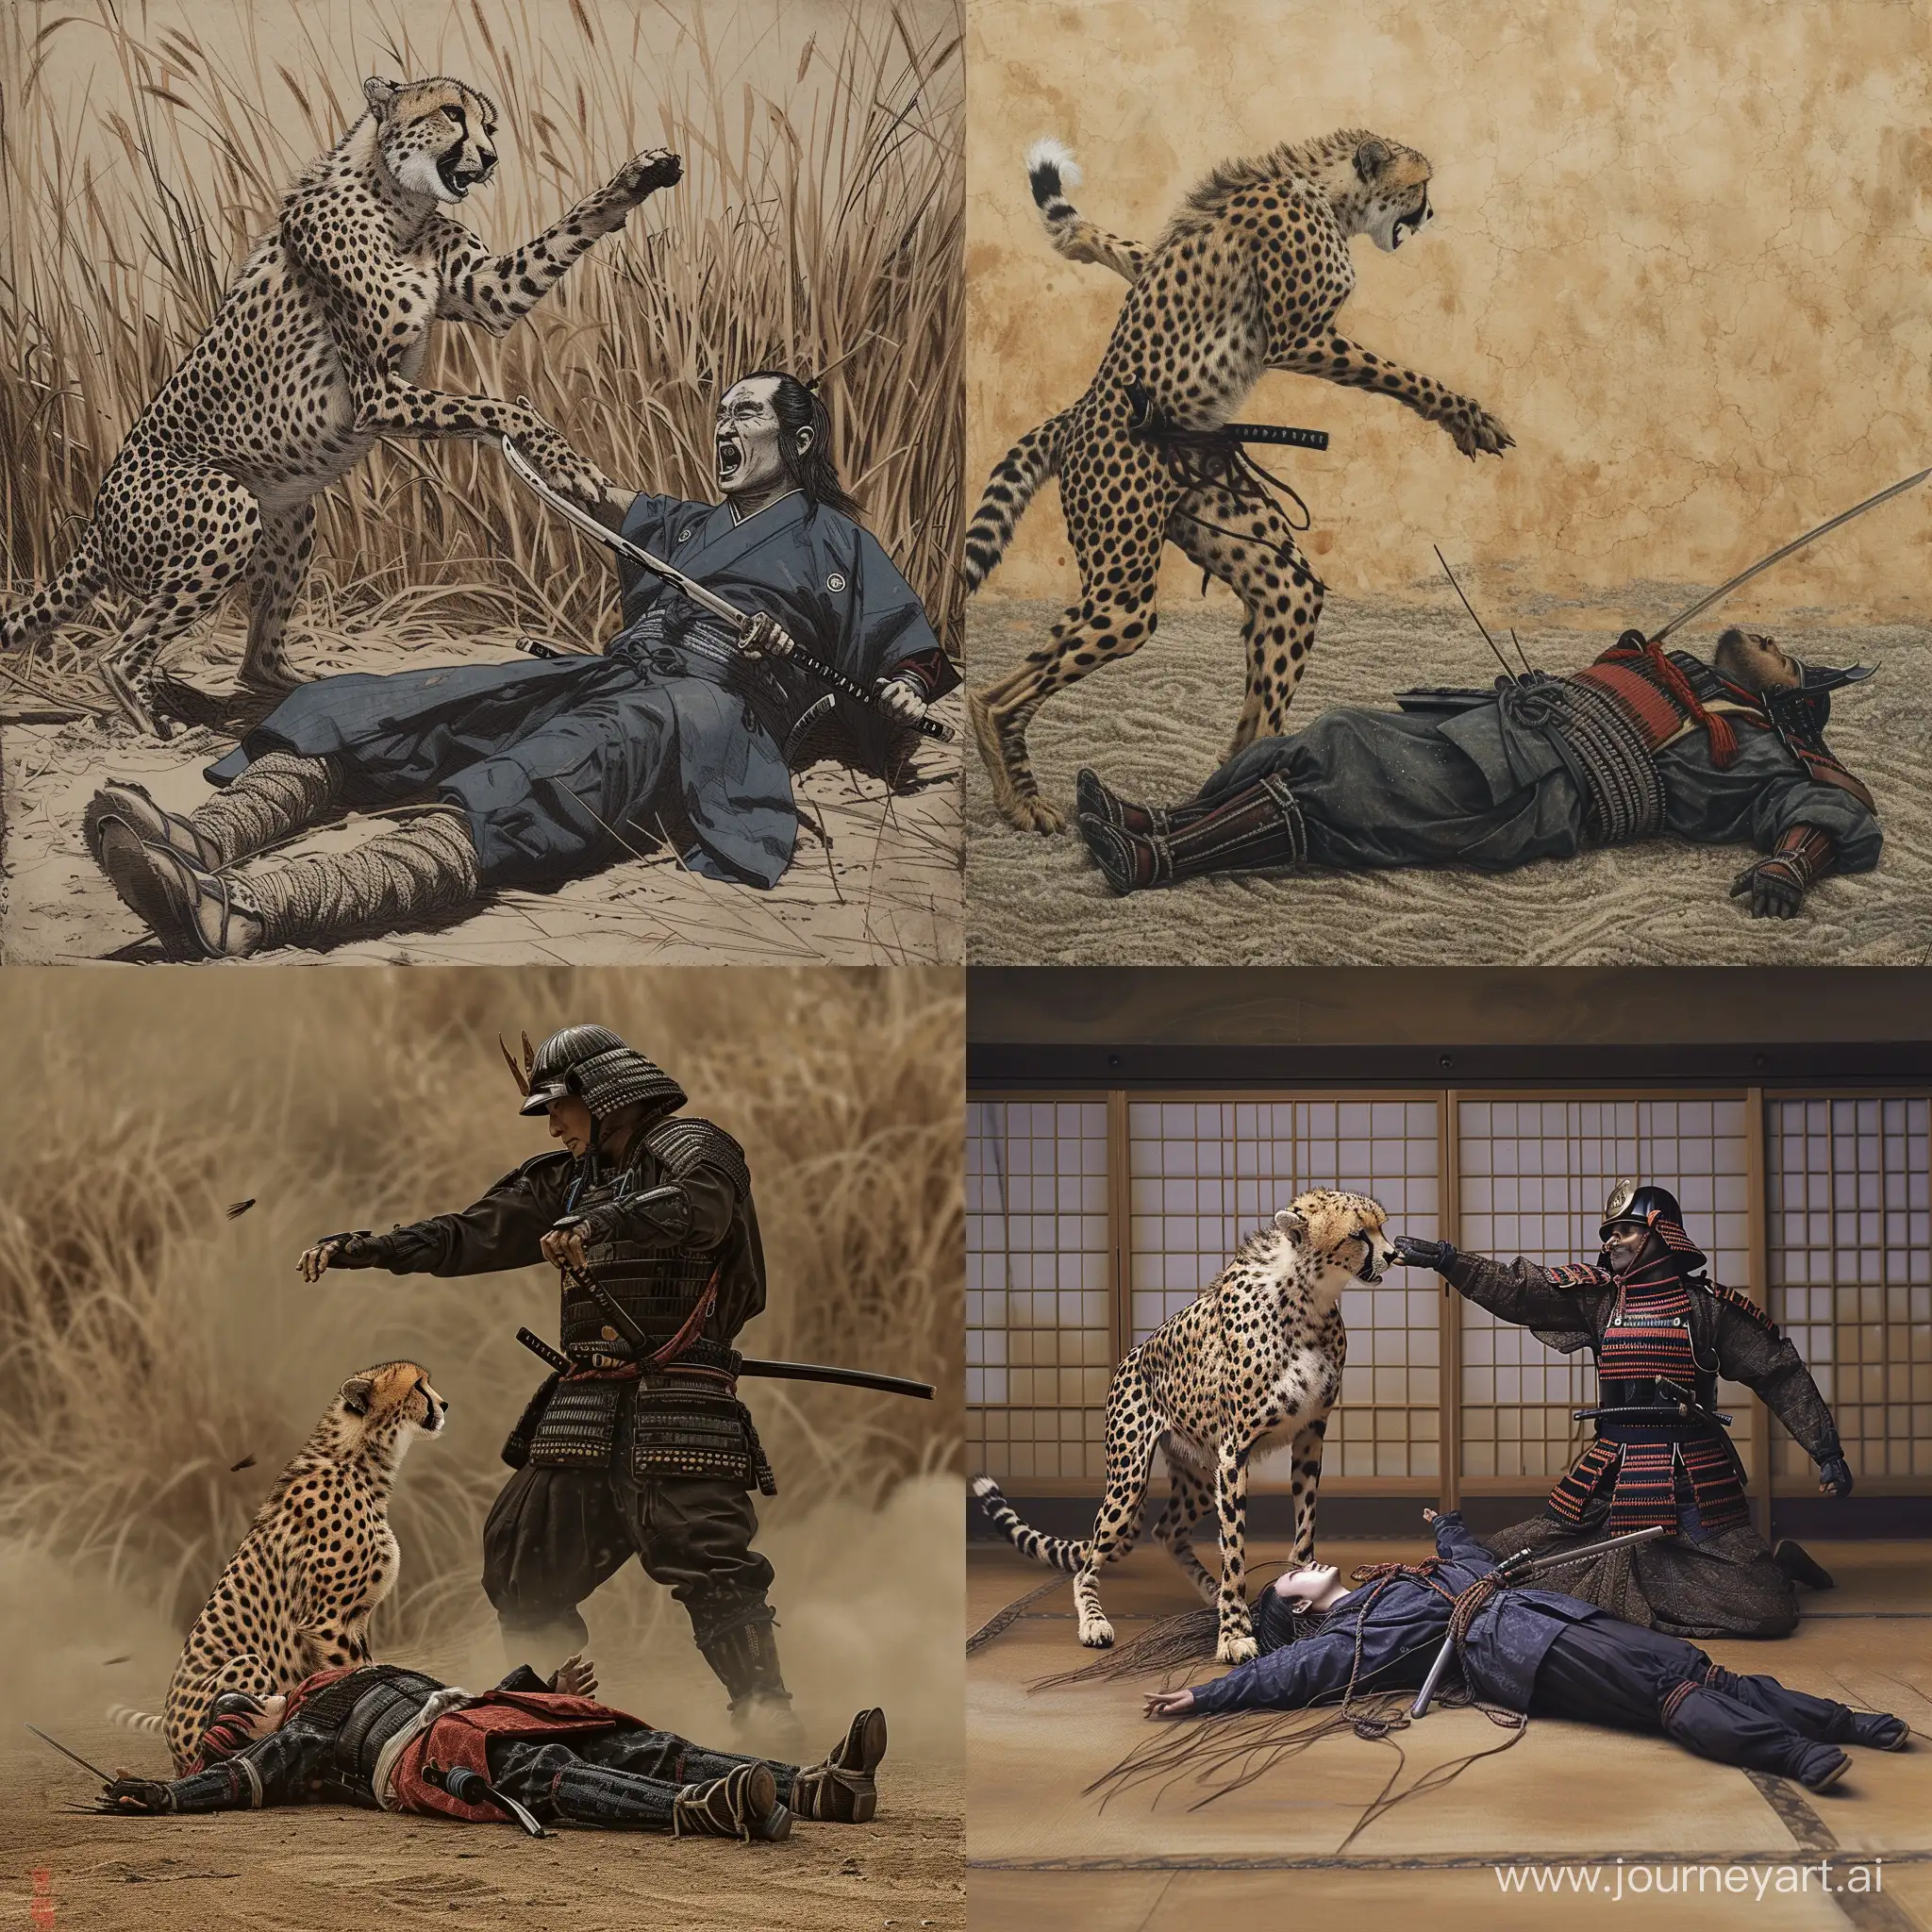 A Cheetah attacking a Samurai lying on the Ground 